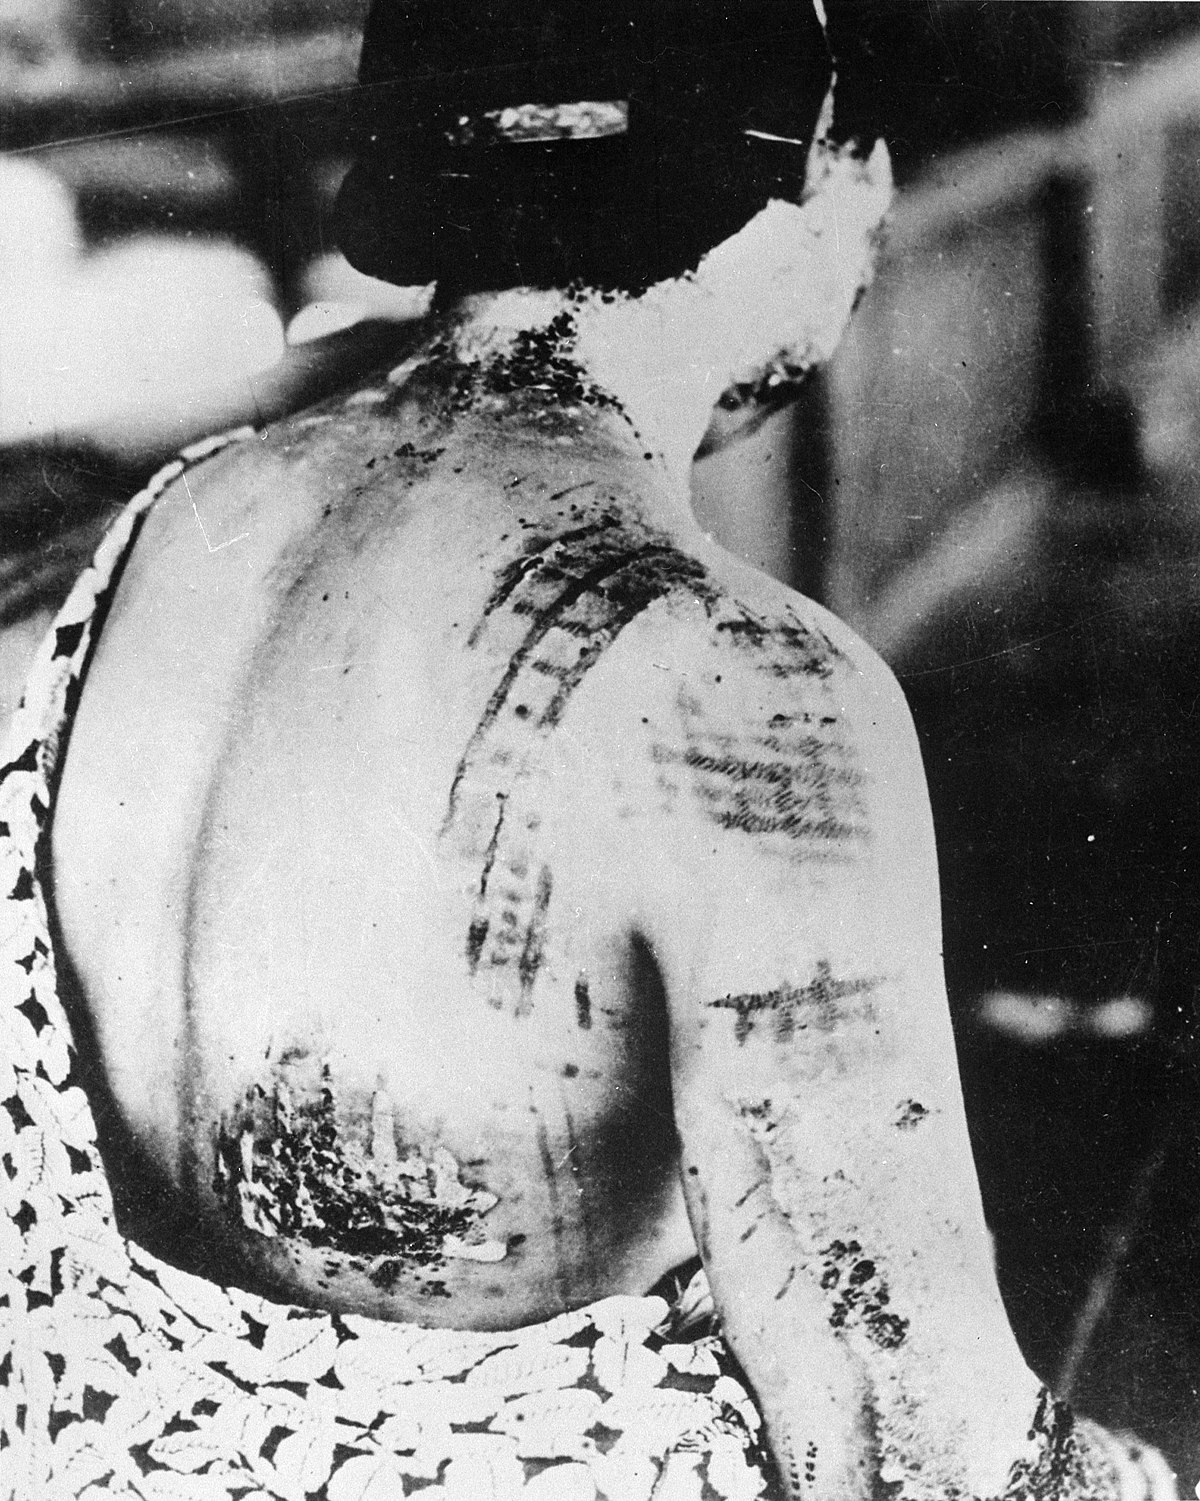 The patient's skin is burned in a pattern corresponding to the dark portions of a kimono - NARA - 519686.jpg